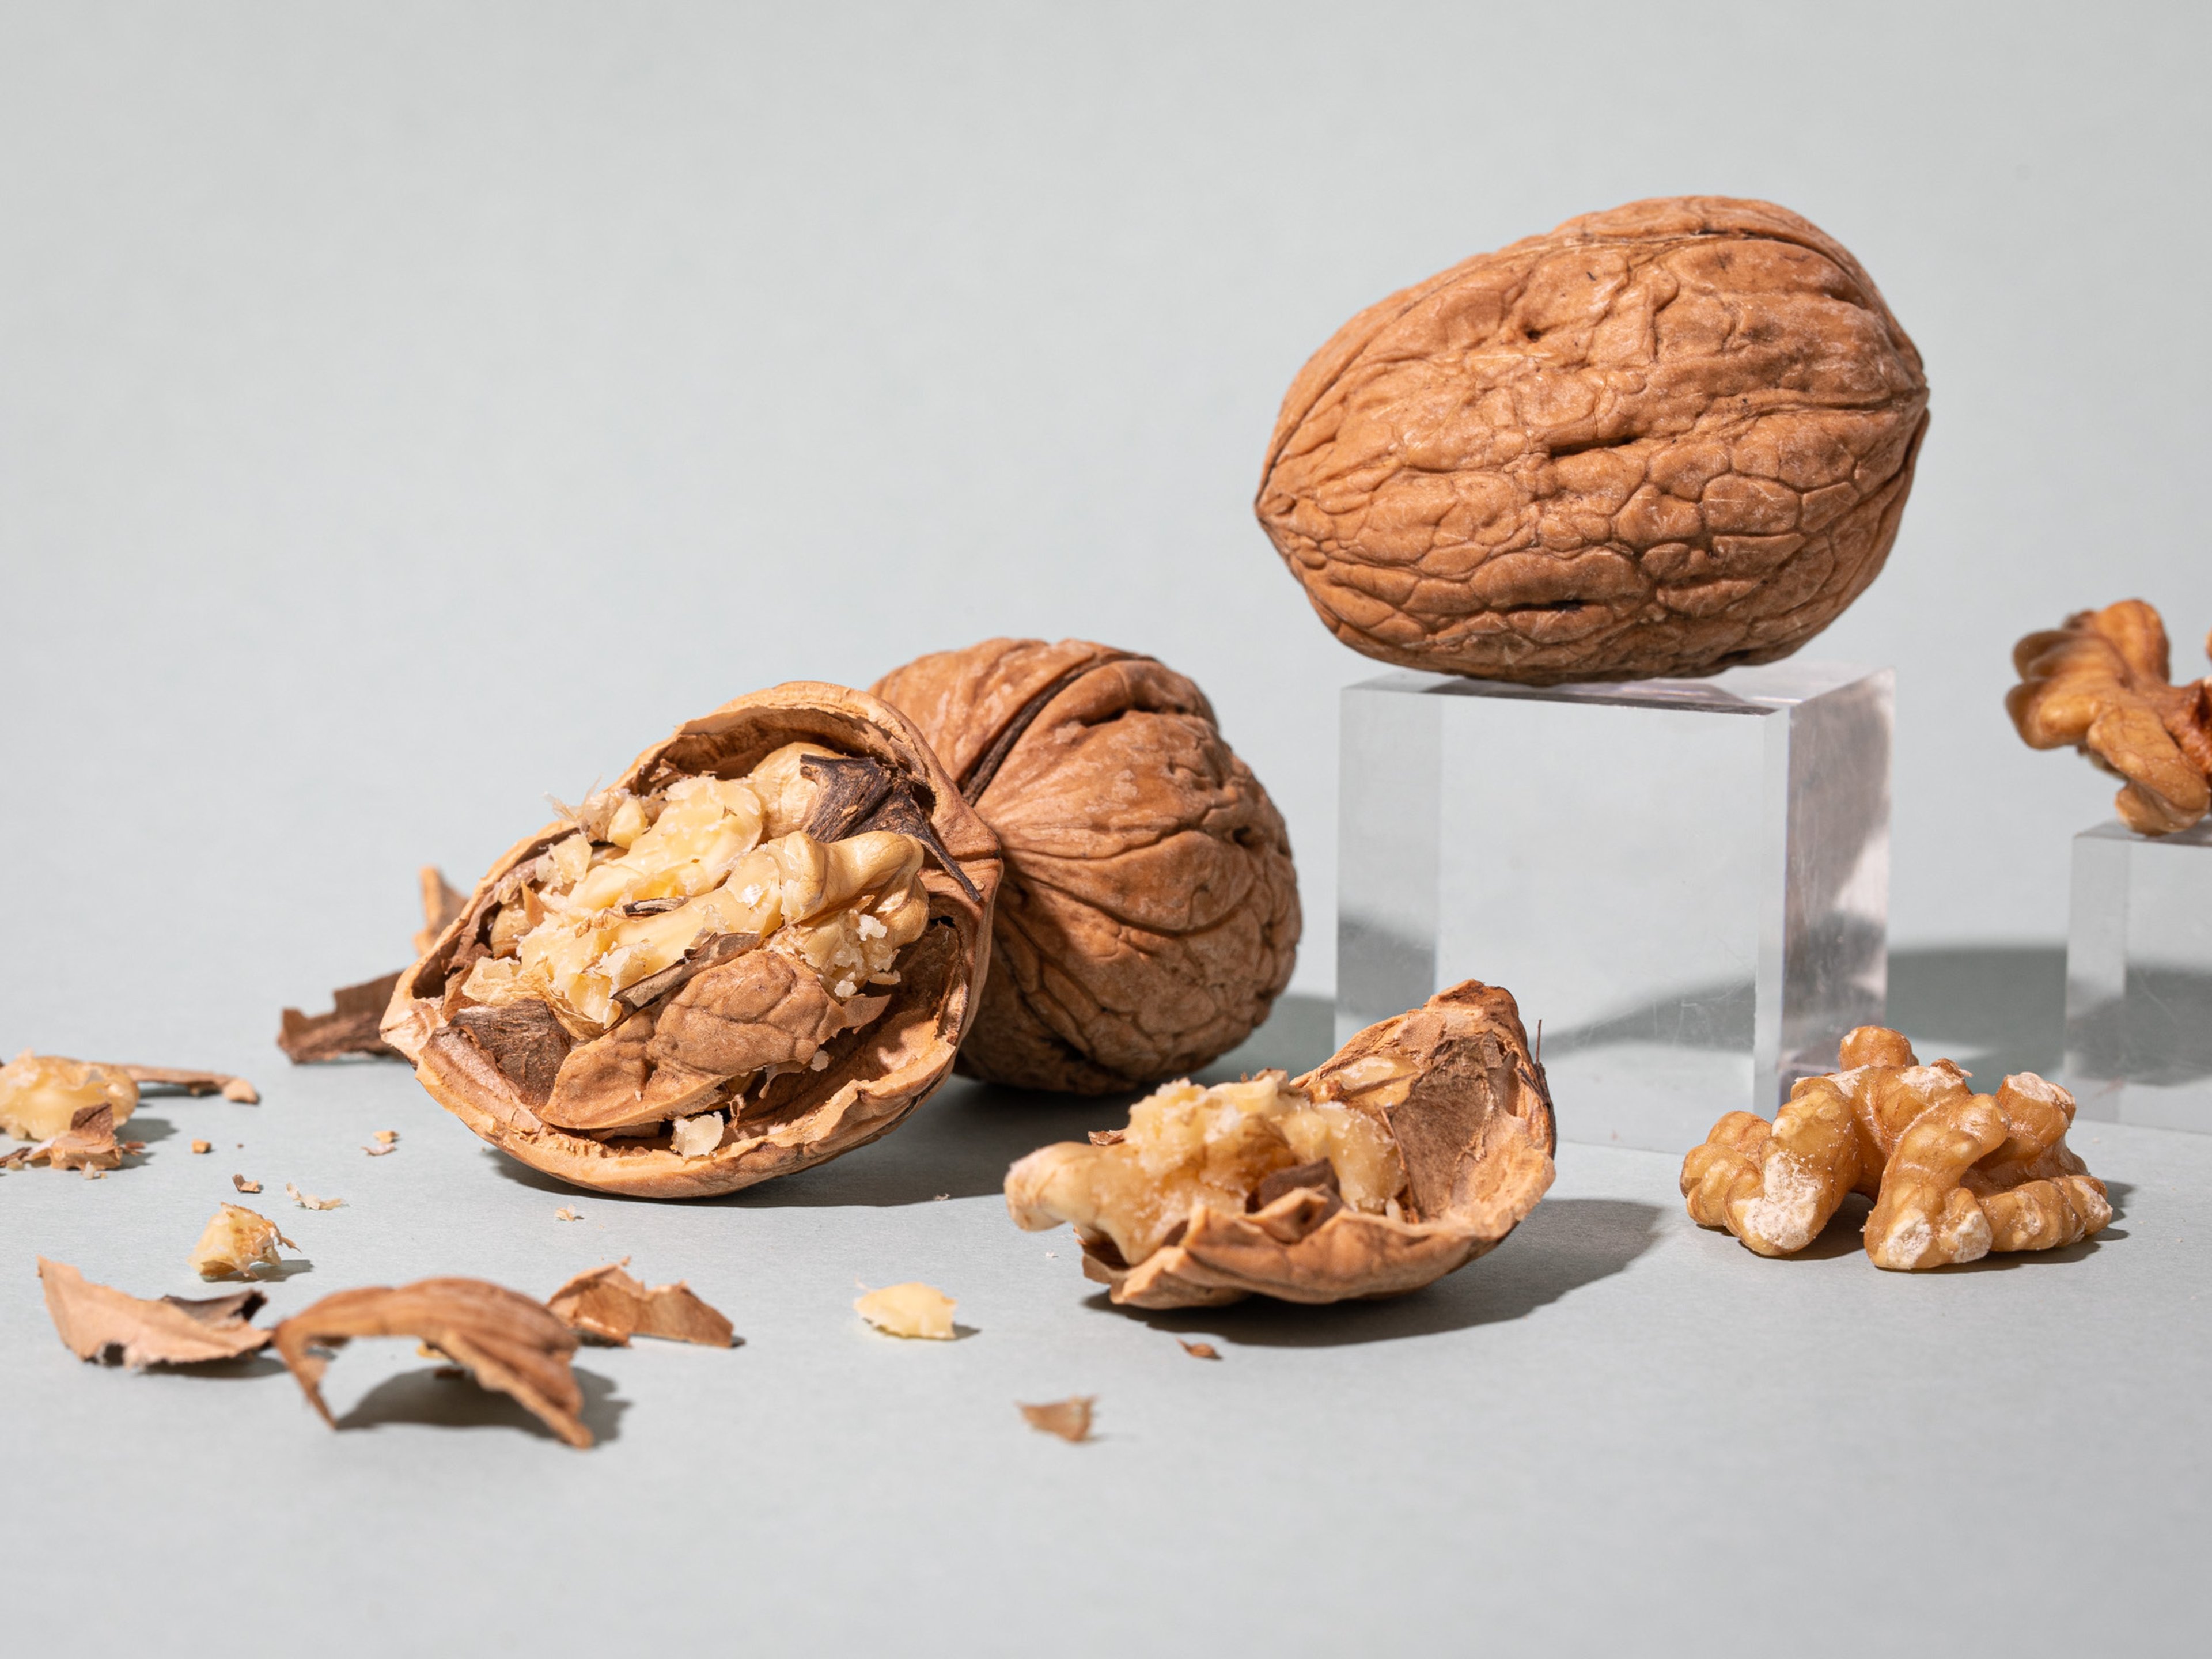 Everything You Need to Know About Preparing and Storing In Season Walnuts